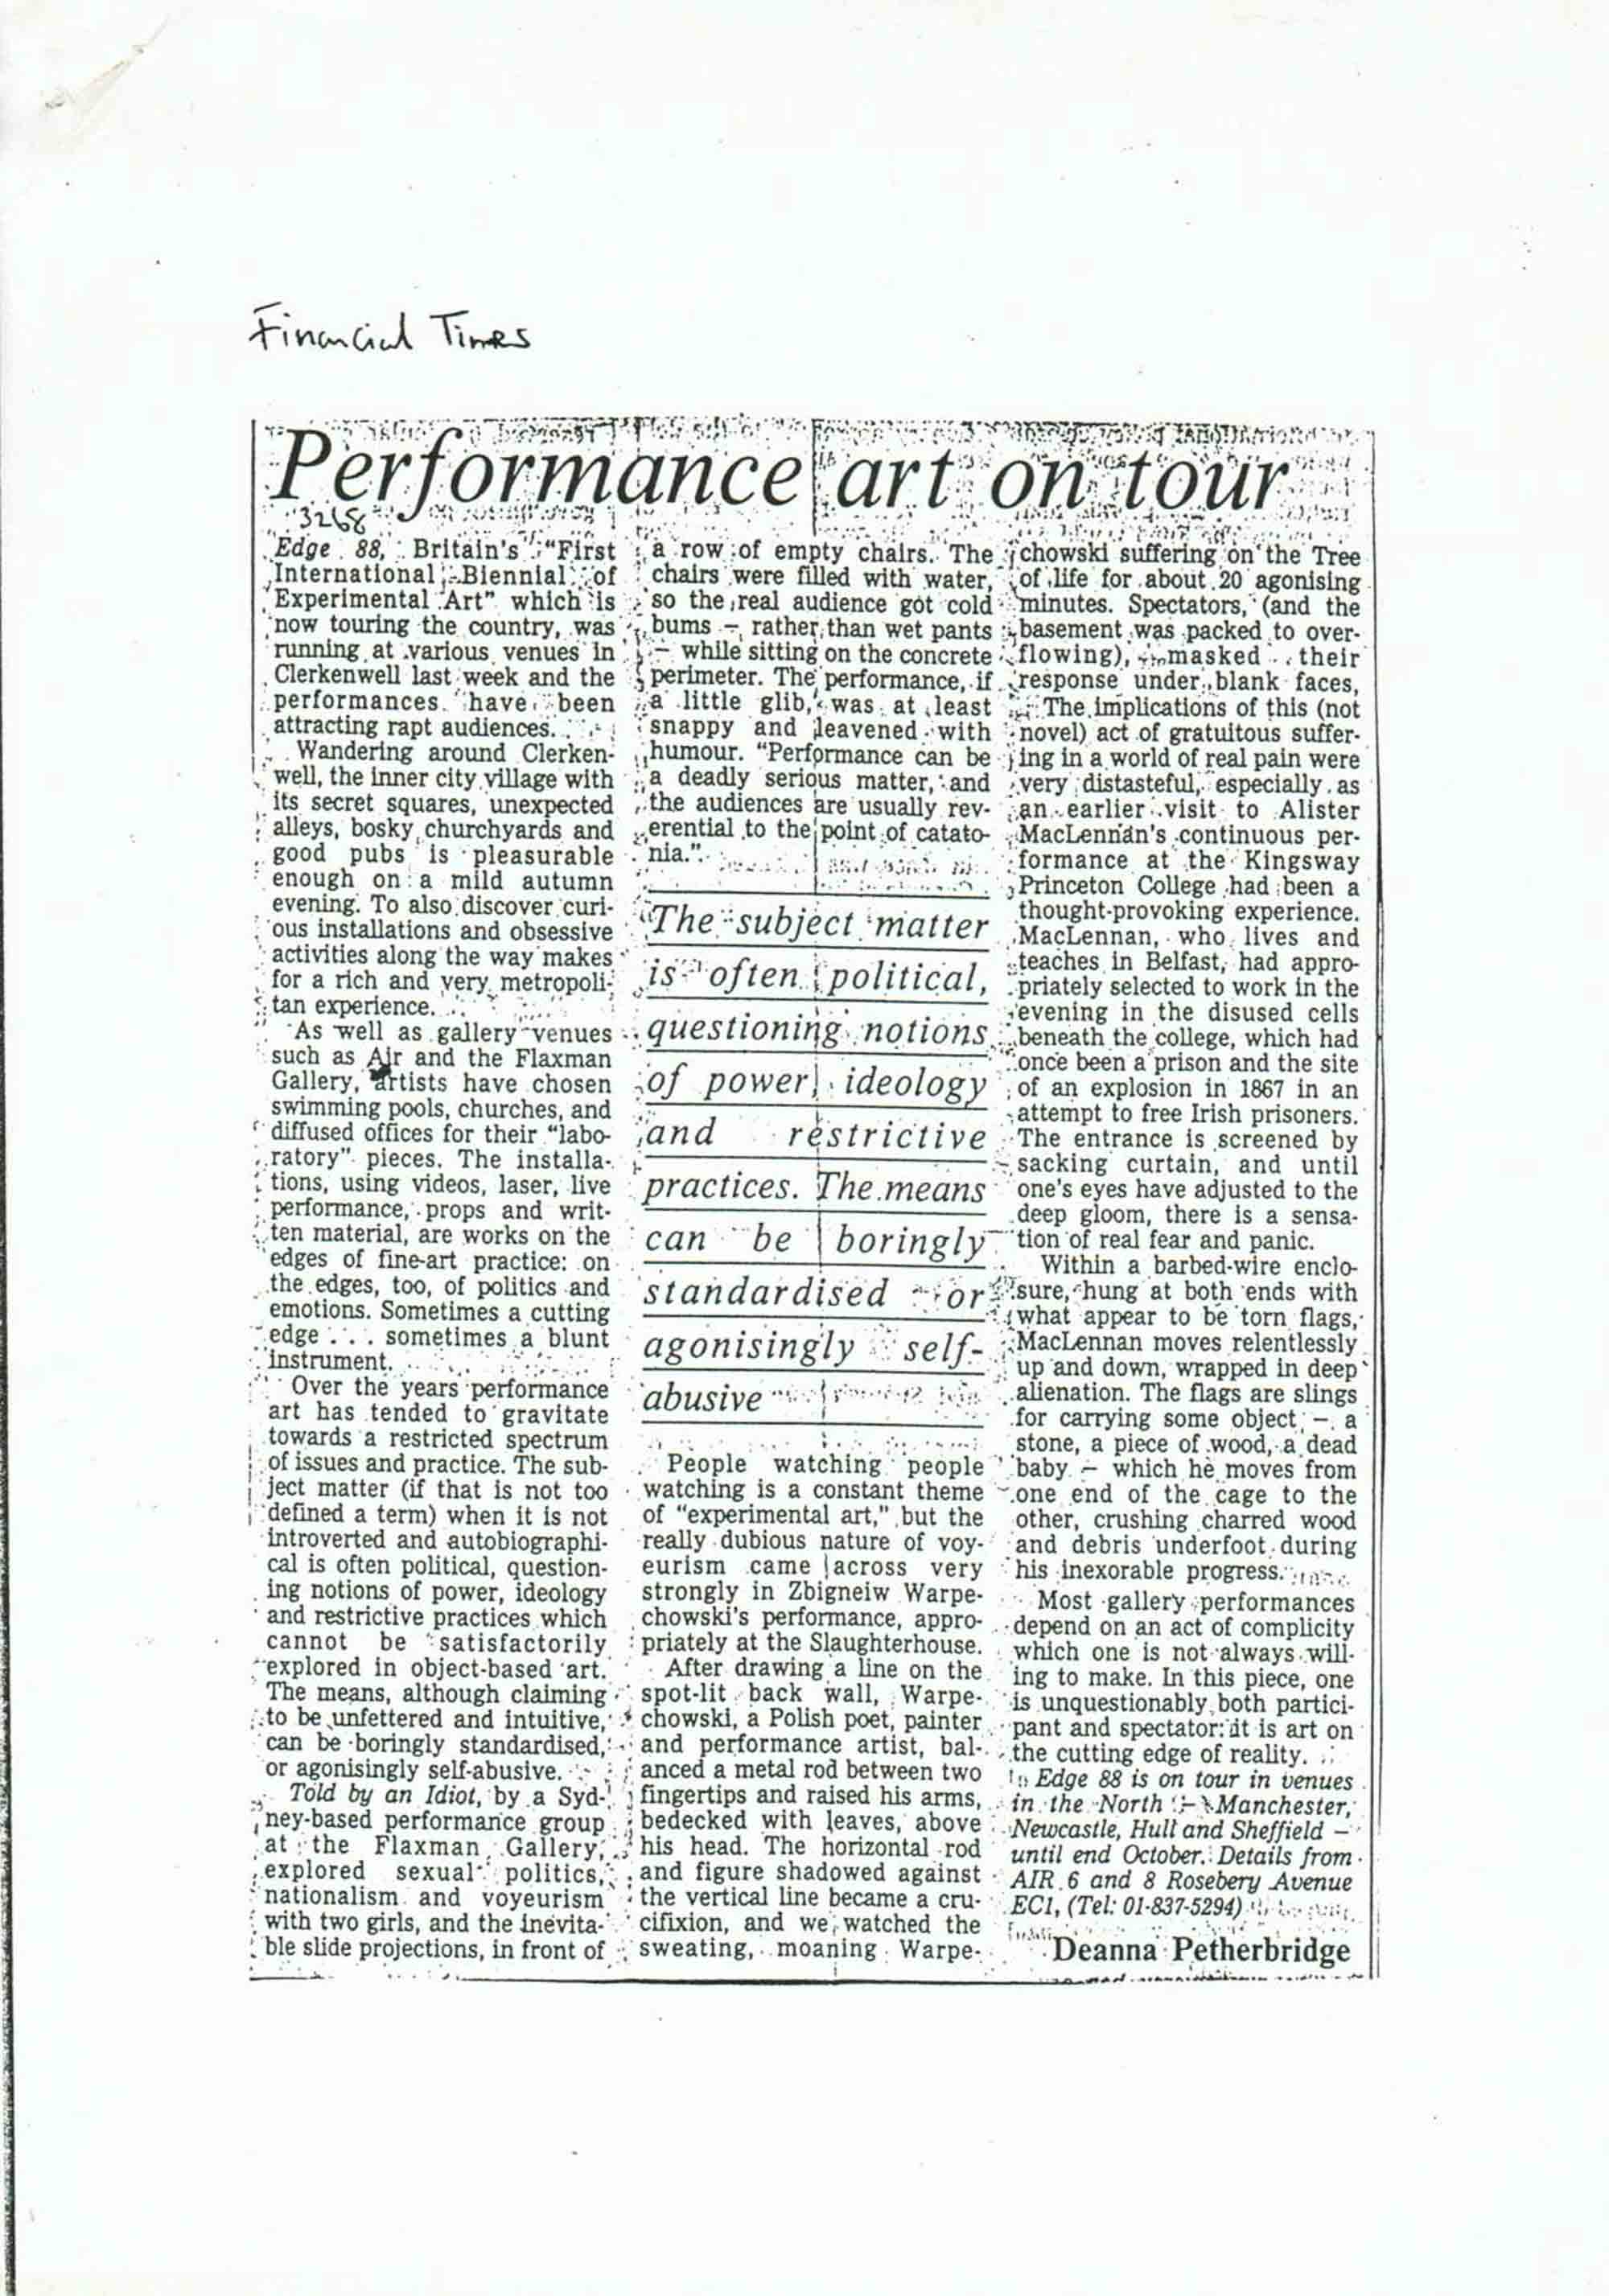 Article by Deanna Petherbridge, Performance Art on Tour, Financial Times, 1988